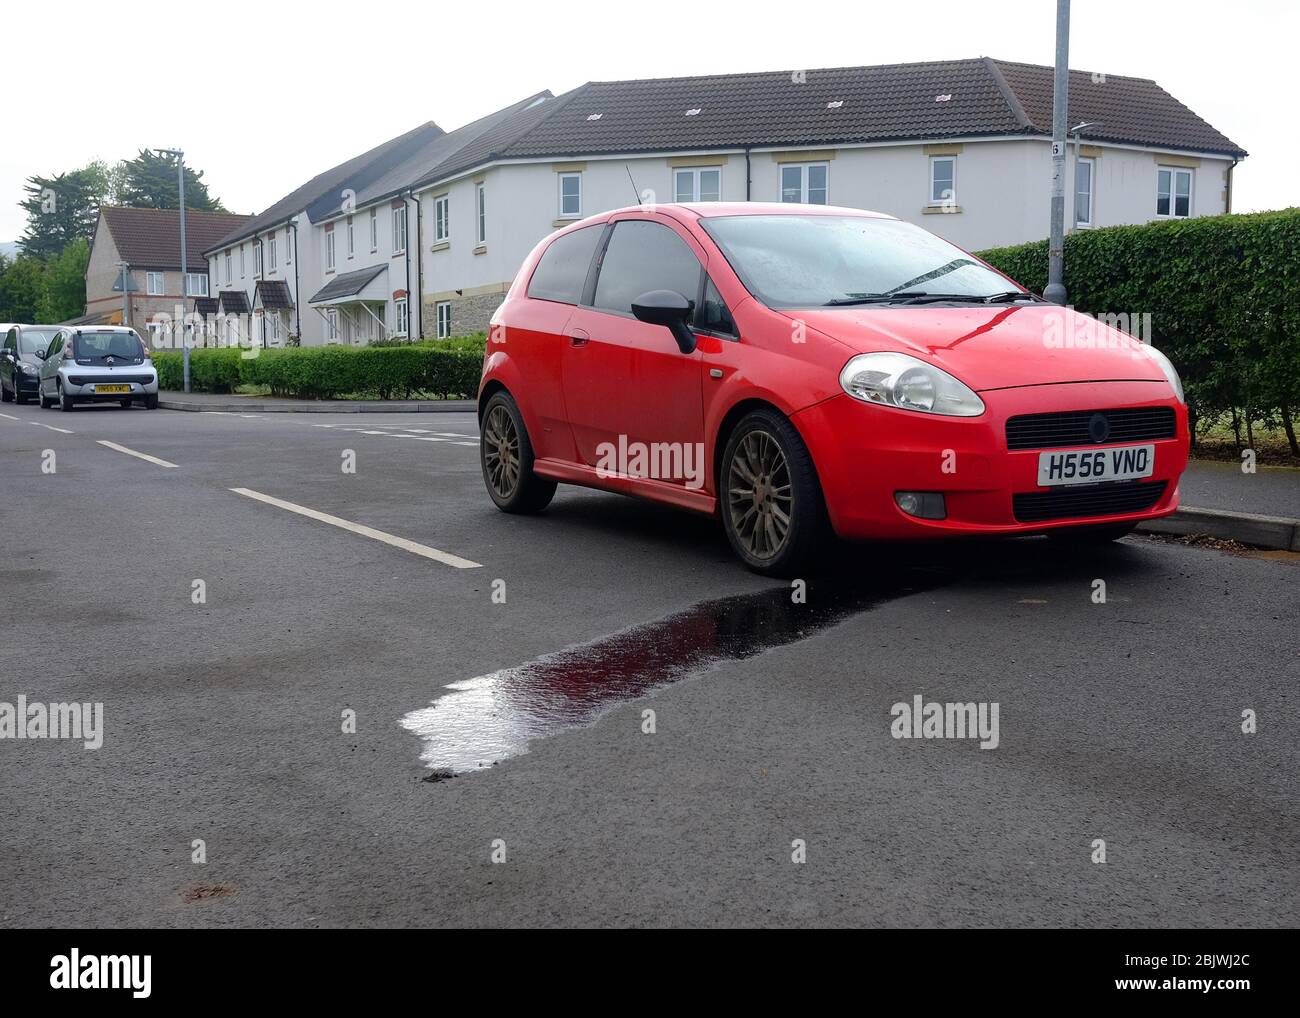 April 2020 - Oil leaking out of an old Fiat Punto Stock Photo - Alamy